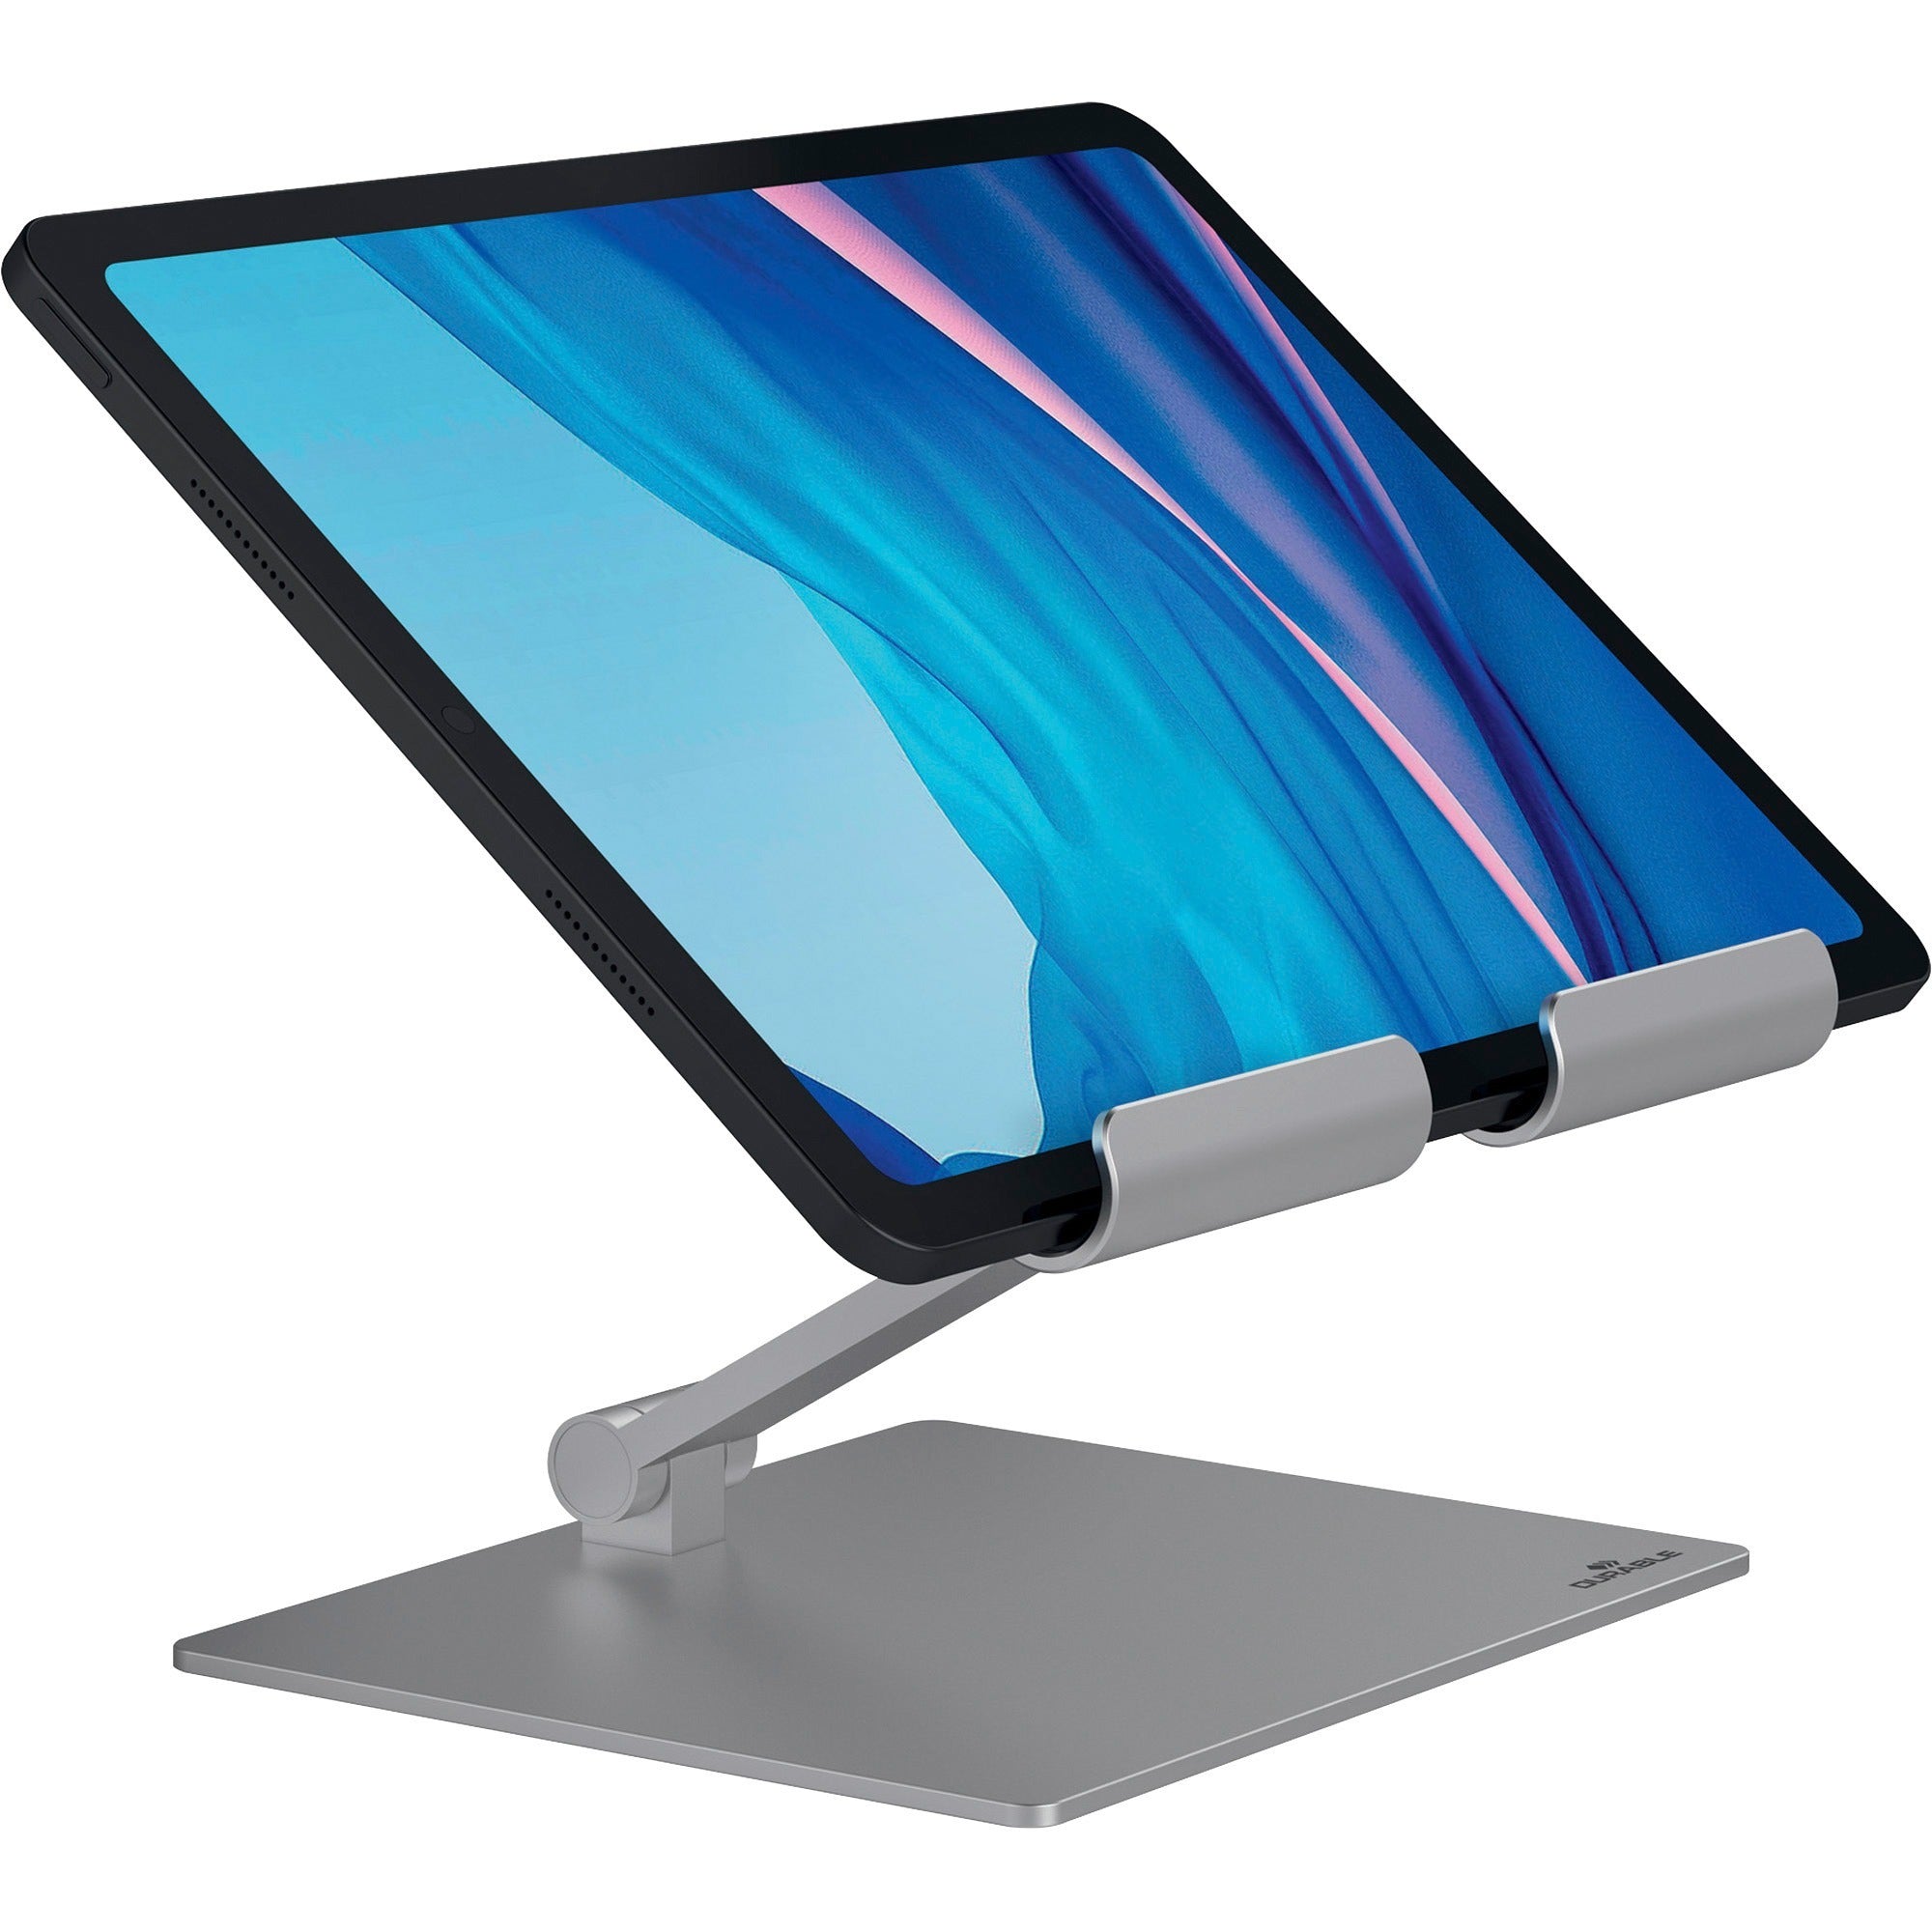 durable-rise-tablet-stand-up-to-13-screen-support-220-lb-load-capacity-81-height-x-67-width-x-54-depth-tabletop-aluminum-silver_dbl894023 - 2